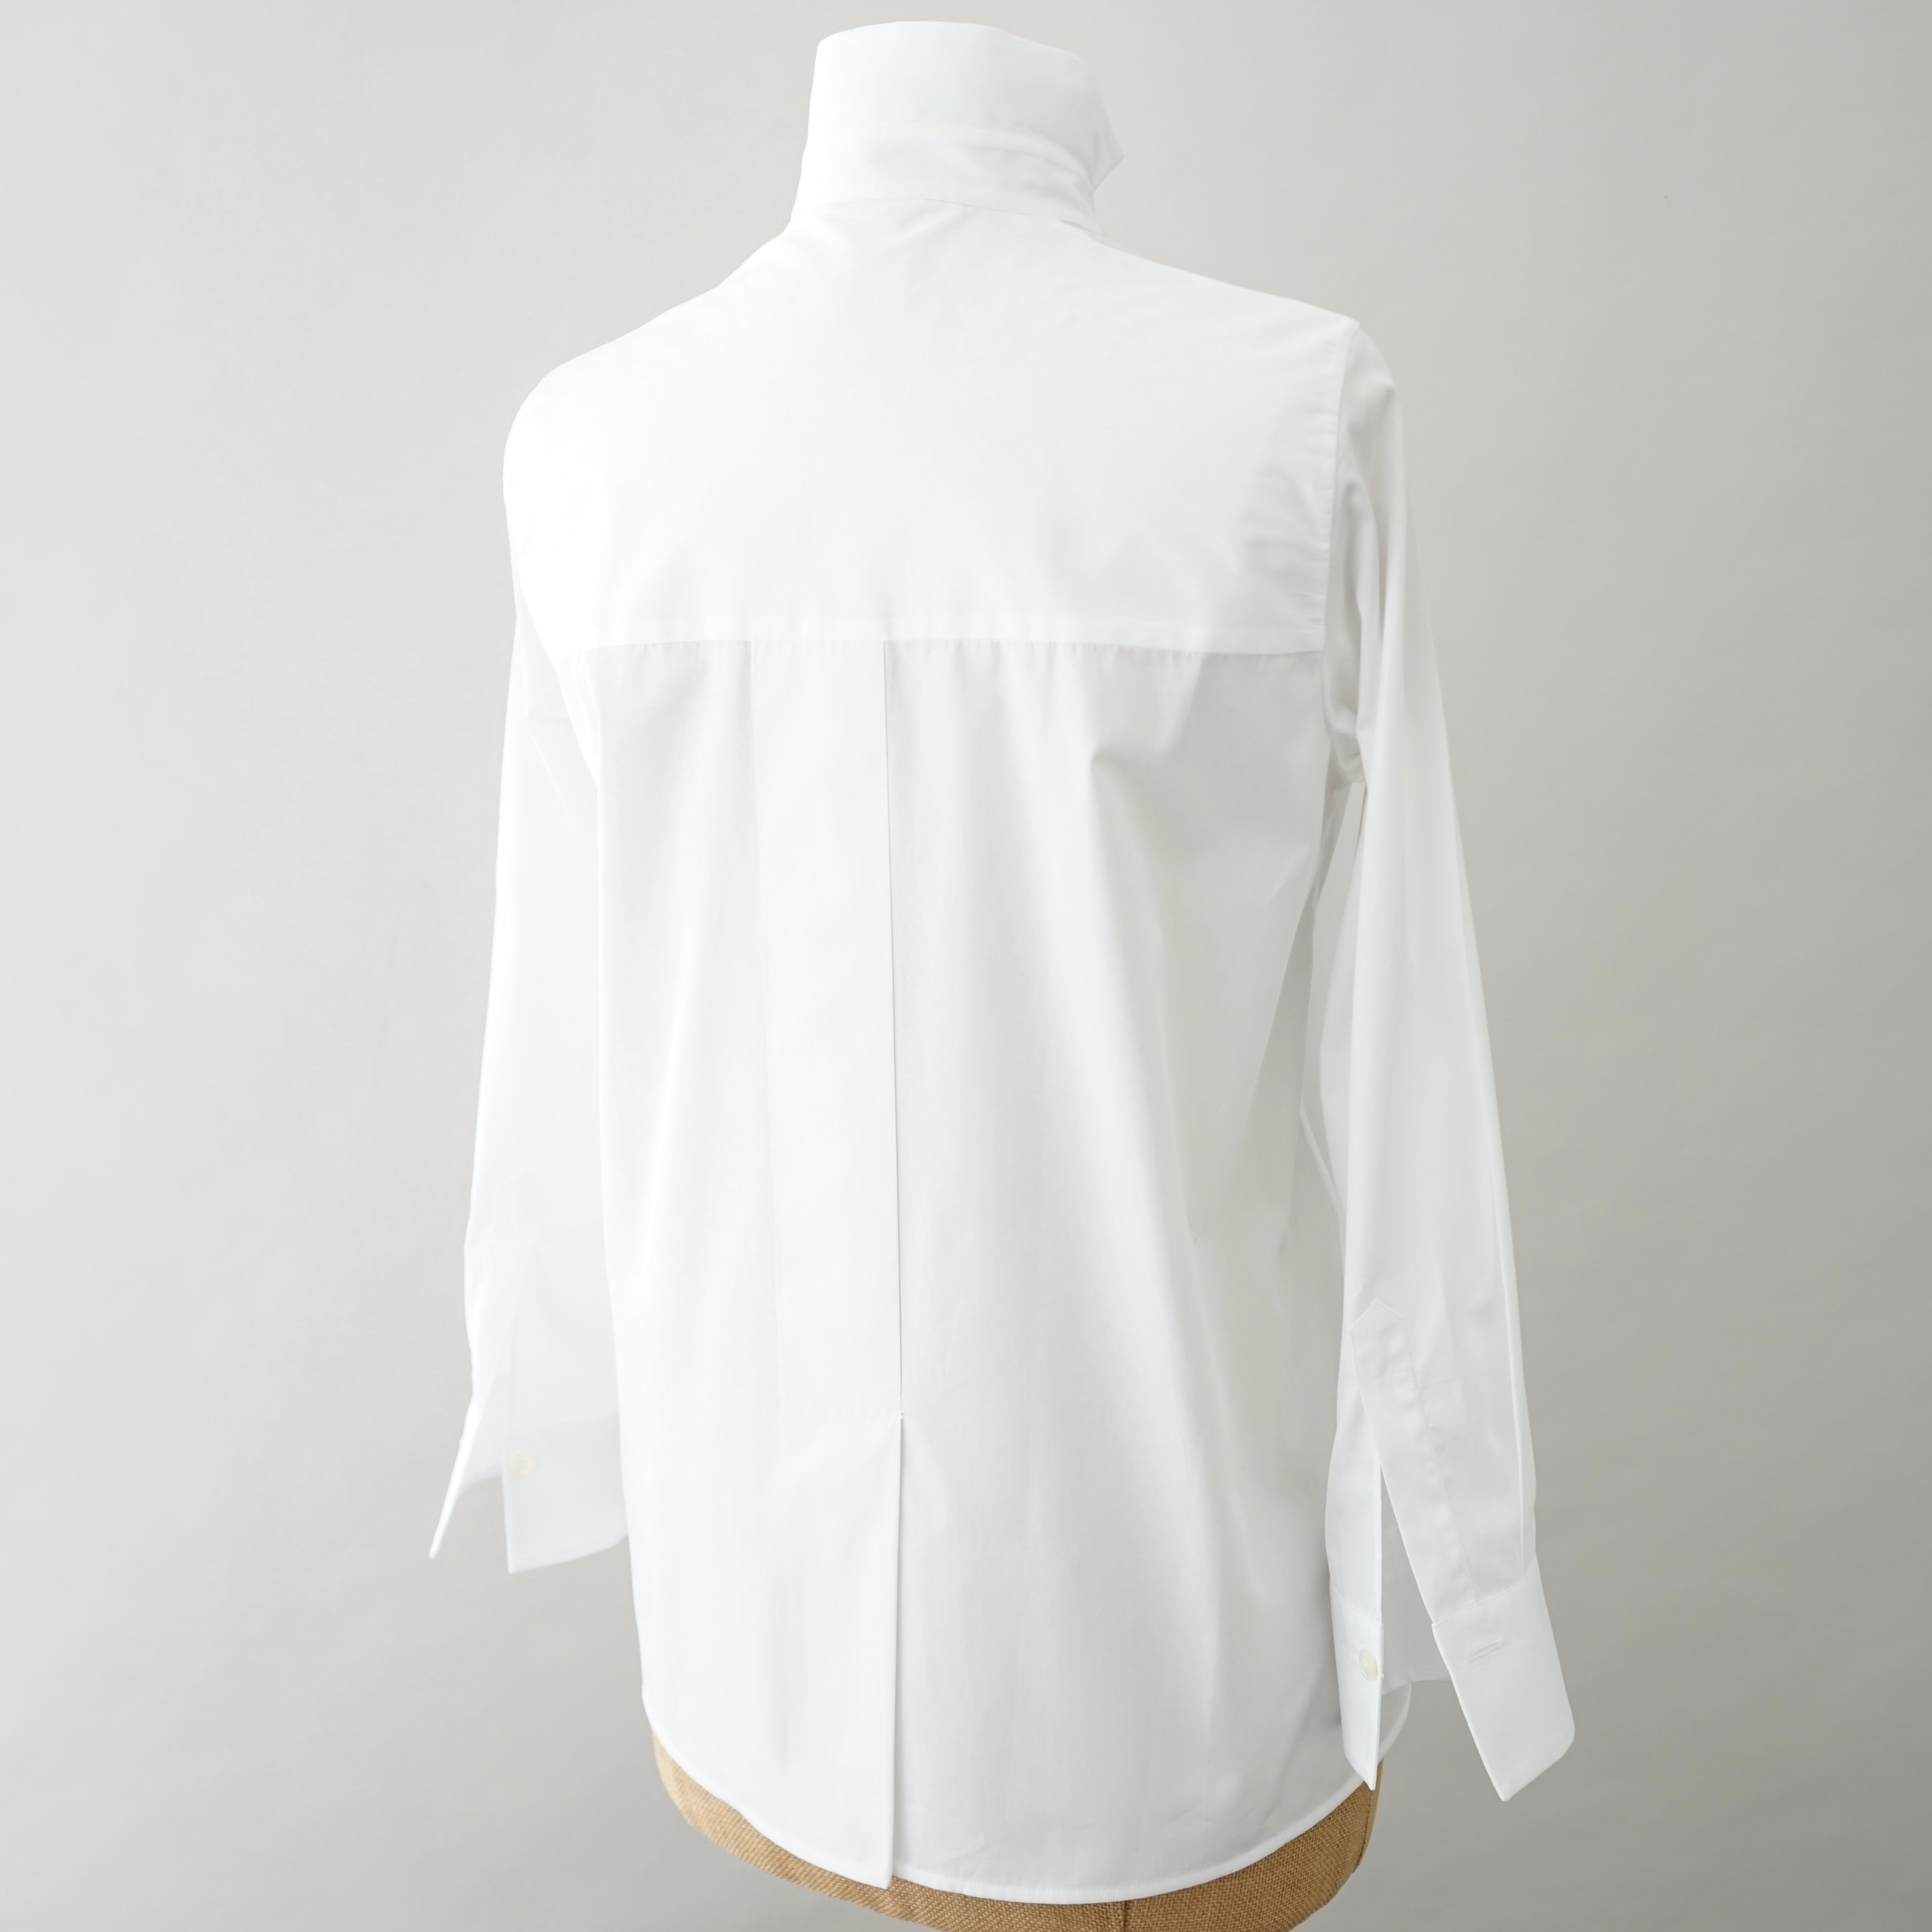 Almost A-Line White Shirt